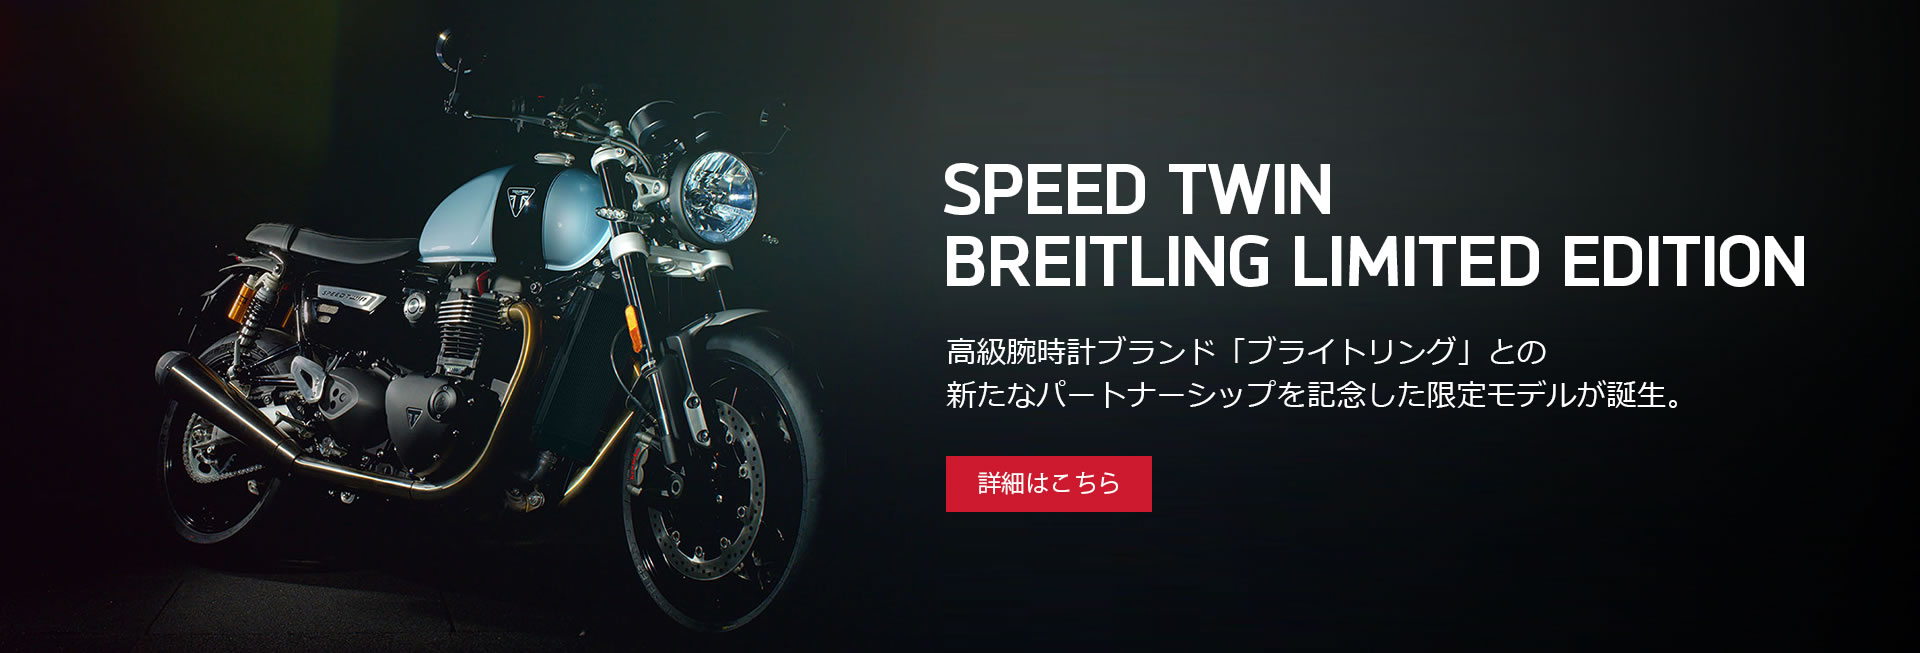 SPEED TWIN BREITLING LIMITED EDITIONが新登場